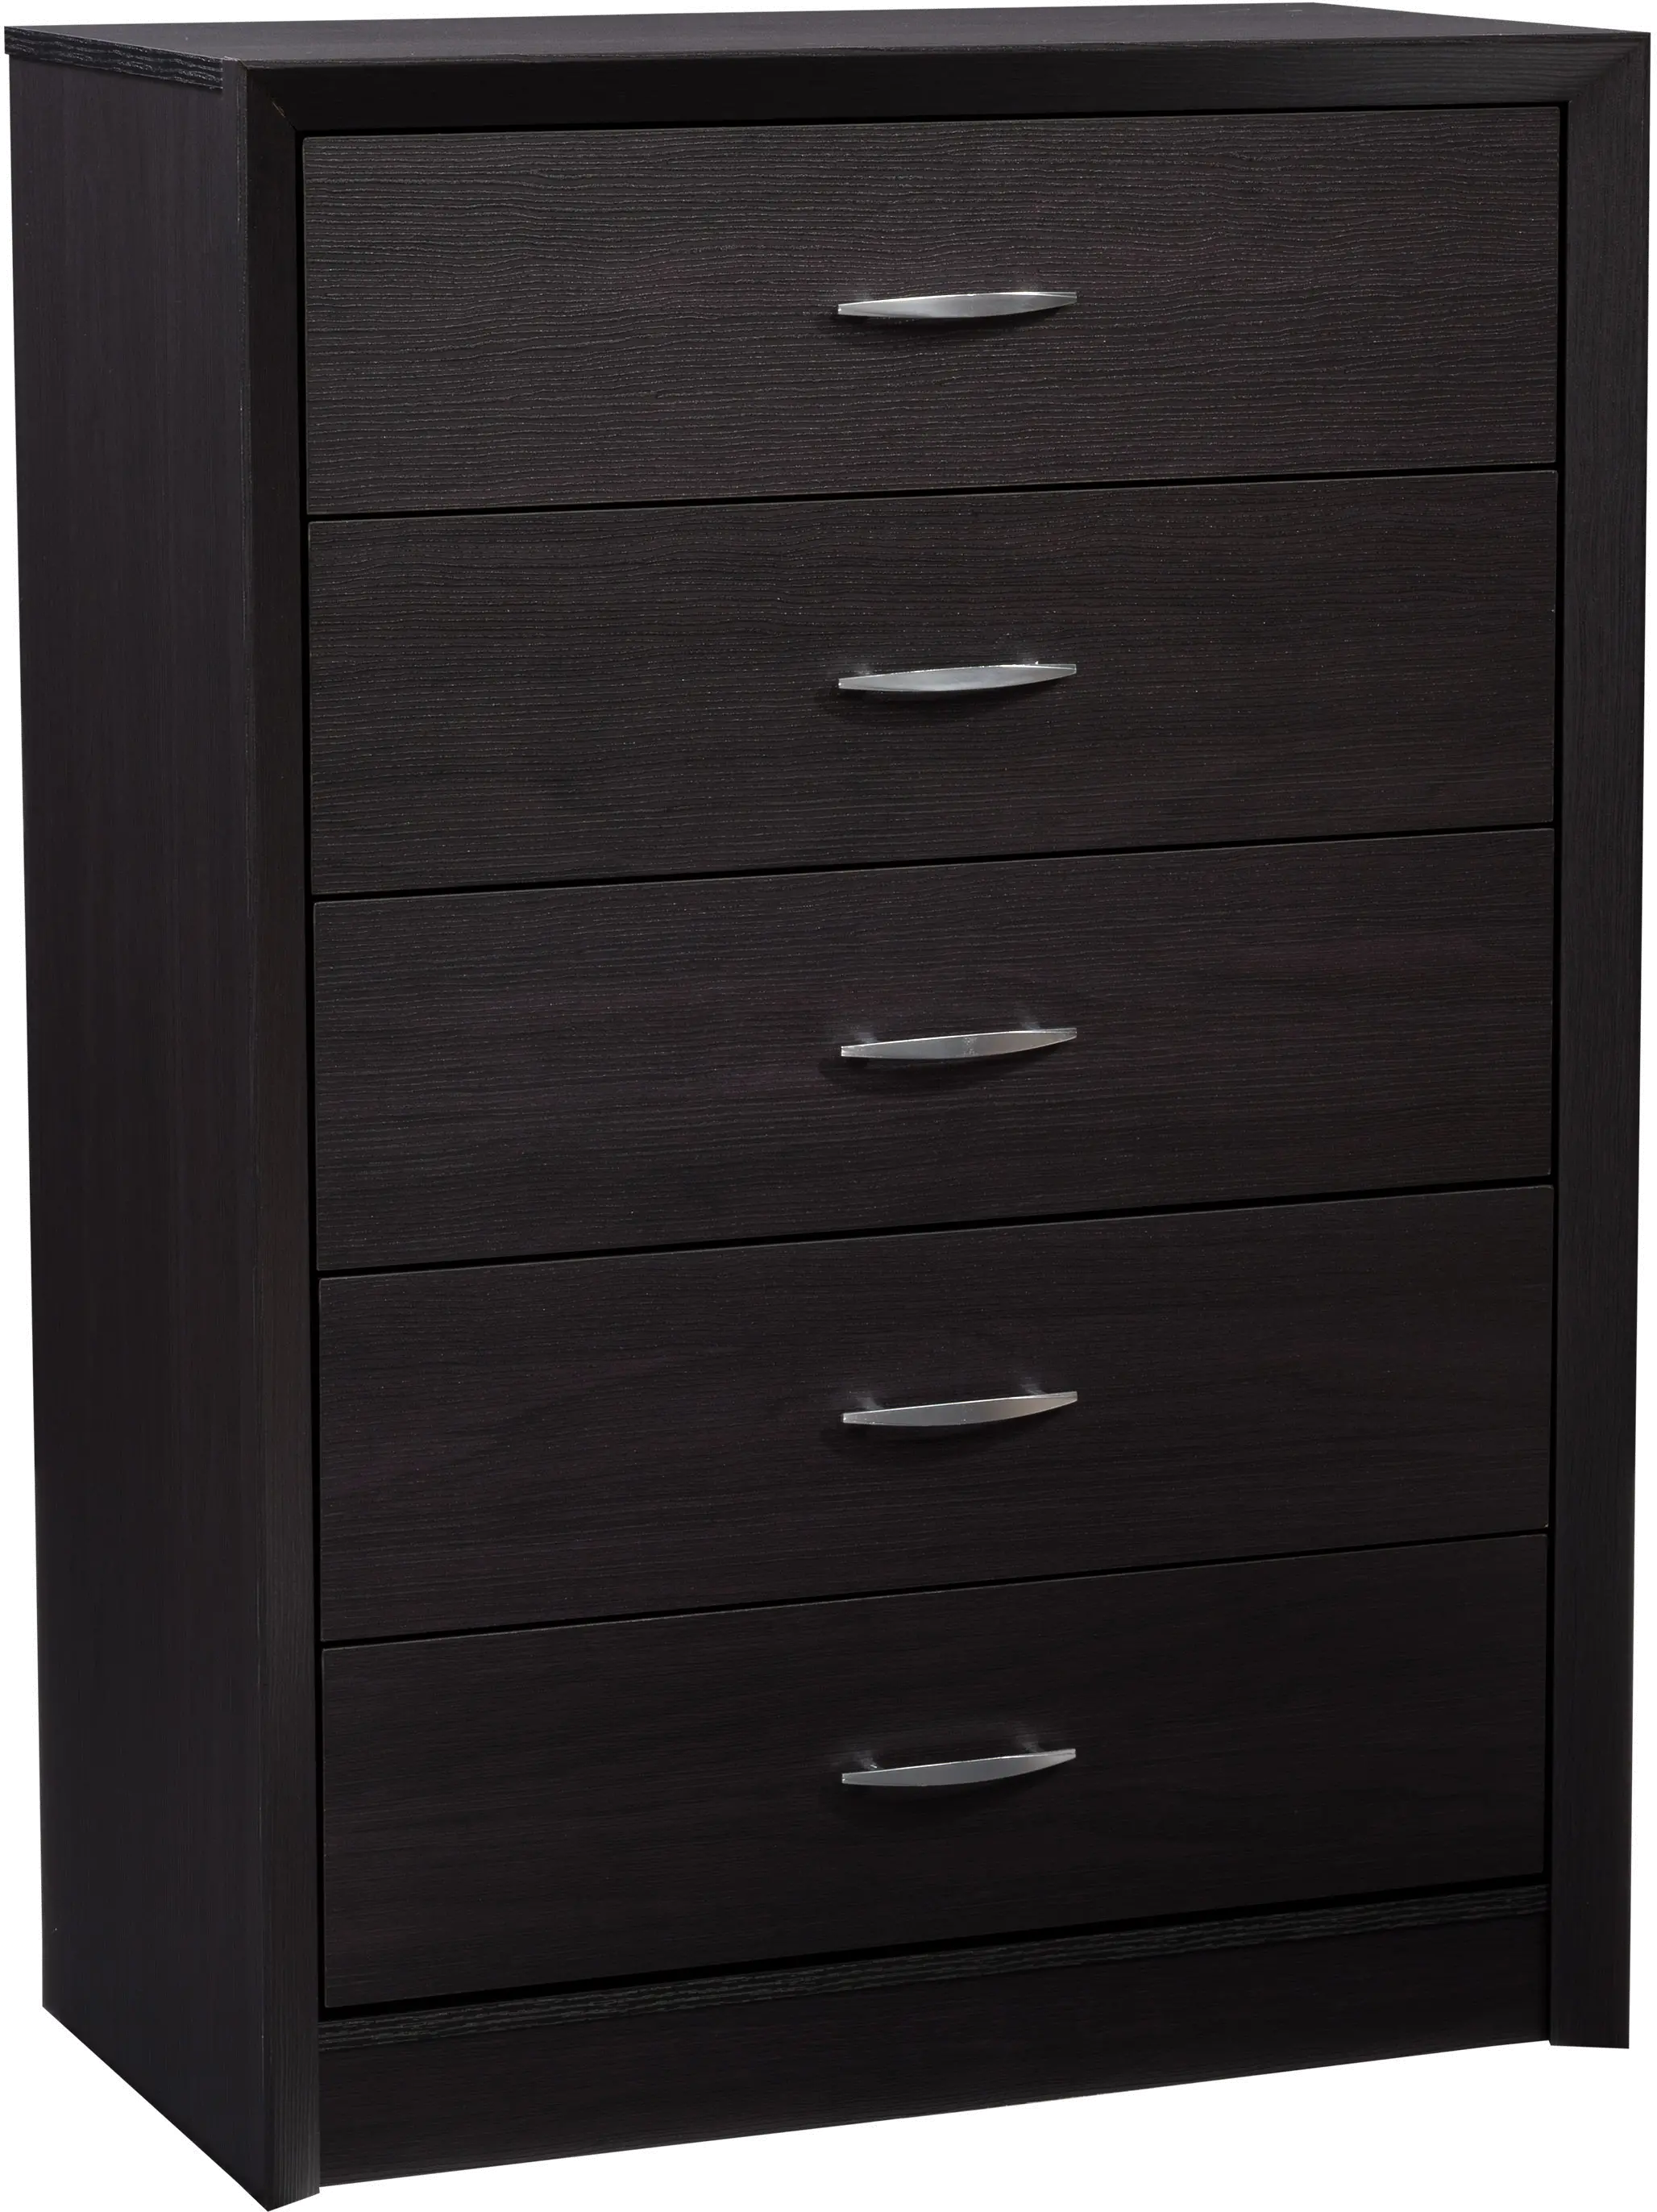 Photos - Dresser / Chests of Drawers CorLiving Newport Contemporary Black Five Drawer Tall Dresser NPT-300-T 